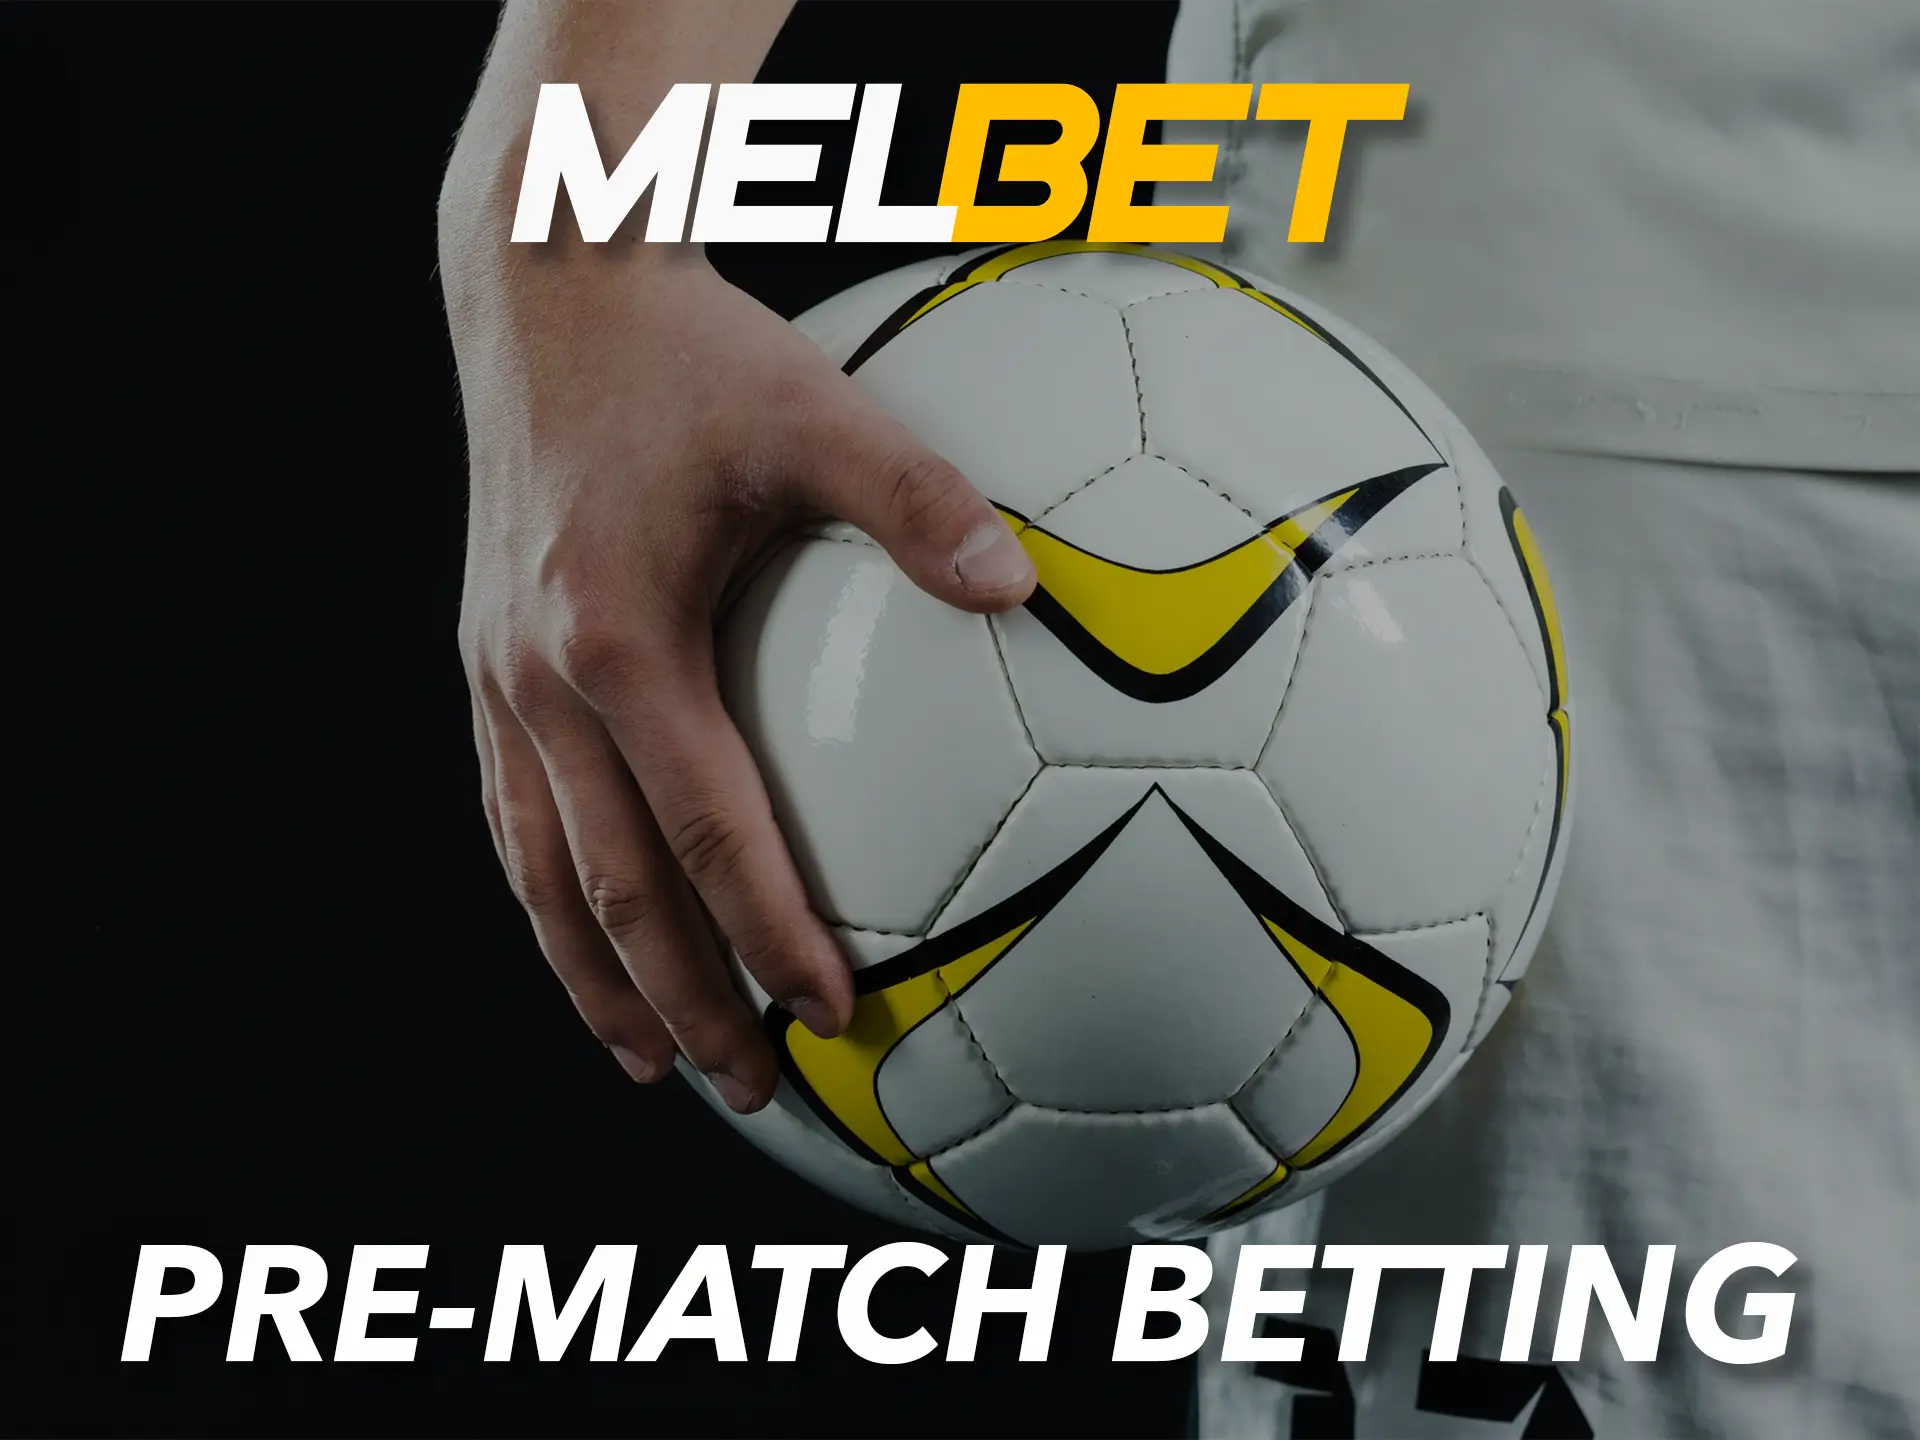 Prematch at Melbet is a good option for beginners and when you see a clear winner of a game.